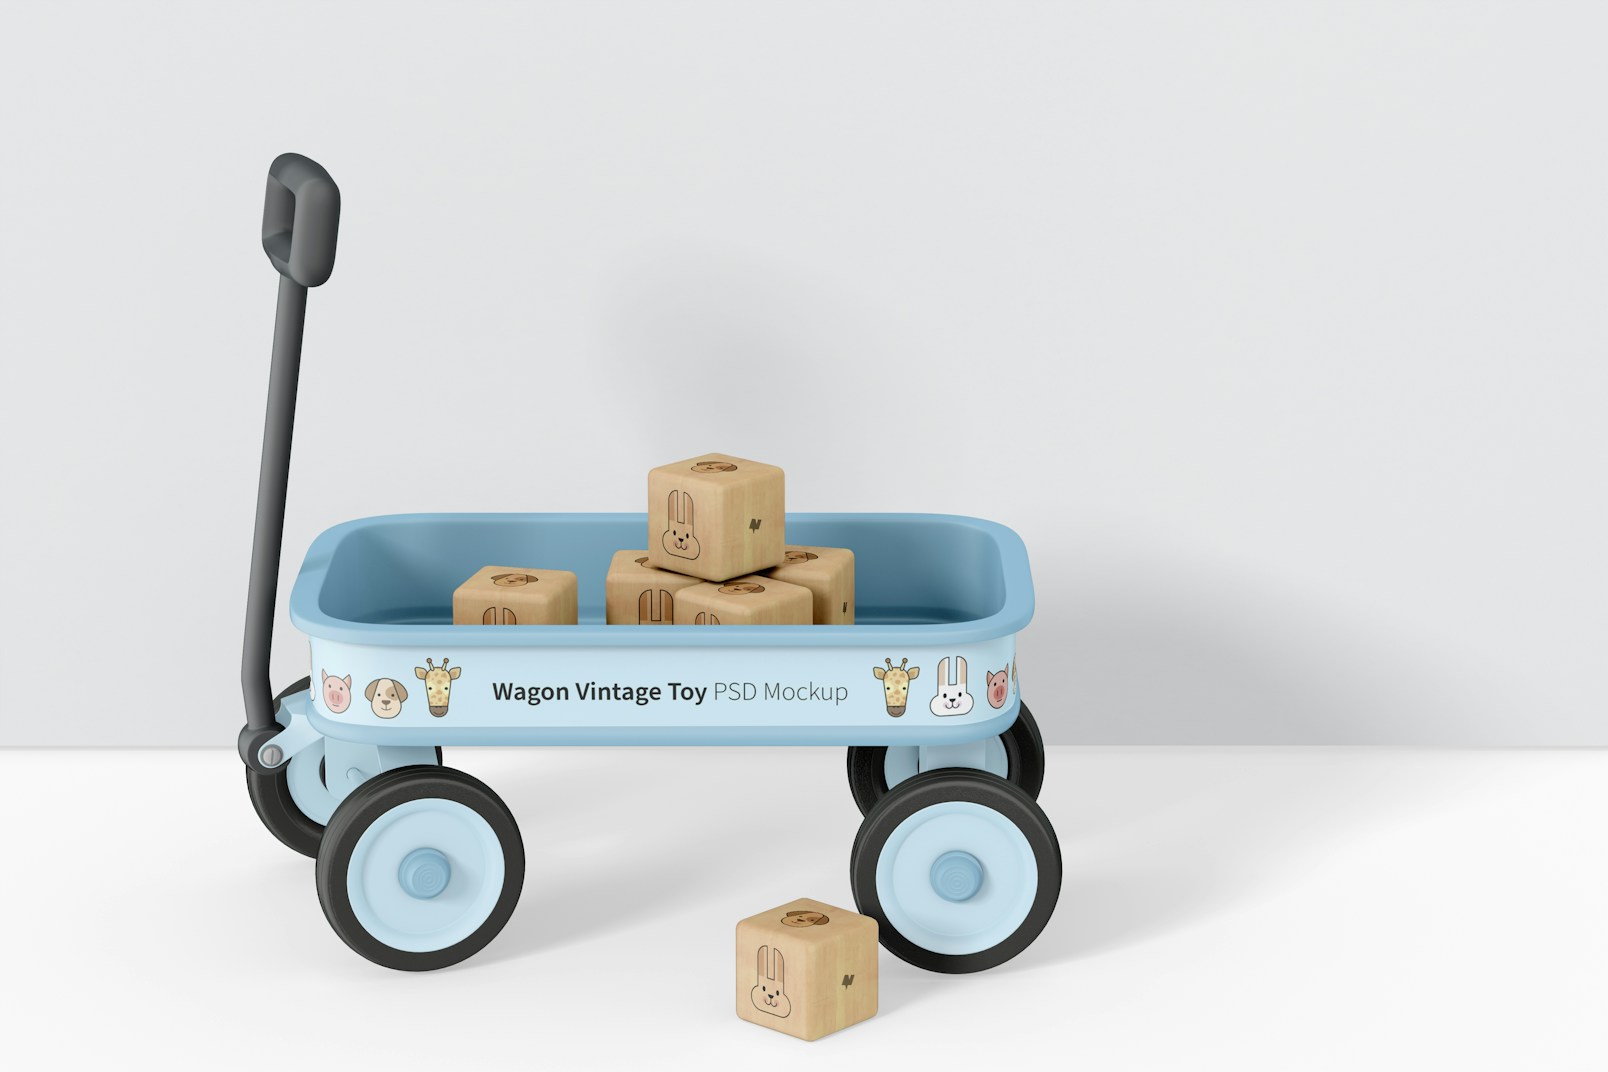 Wagon Vintage Toy with Wooden Blocks Mockup